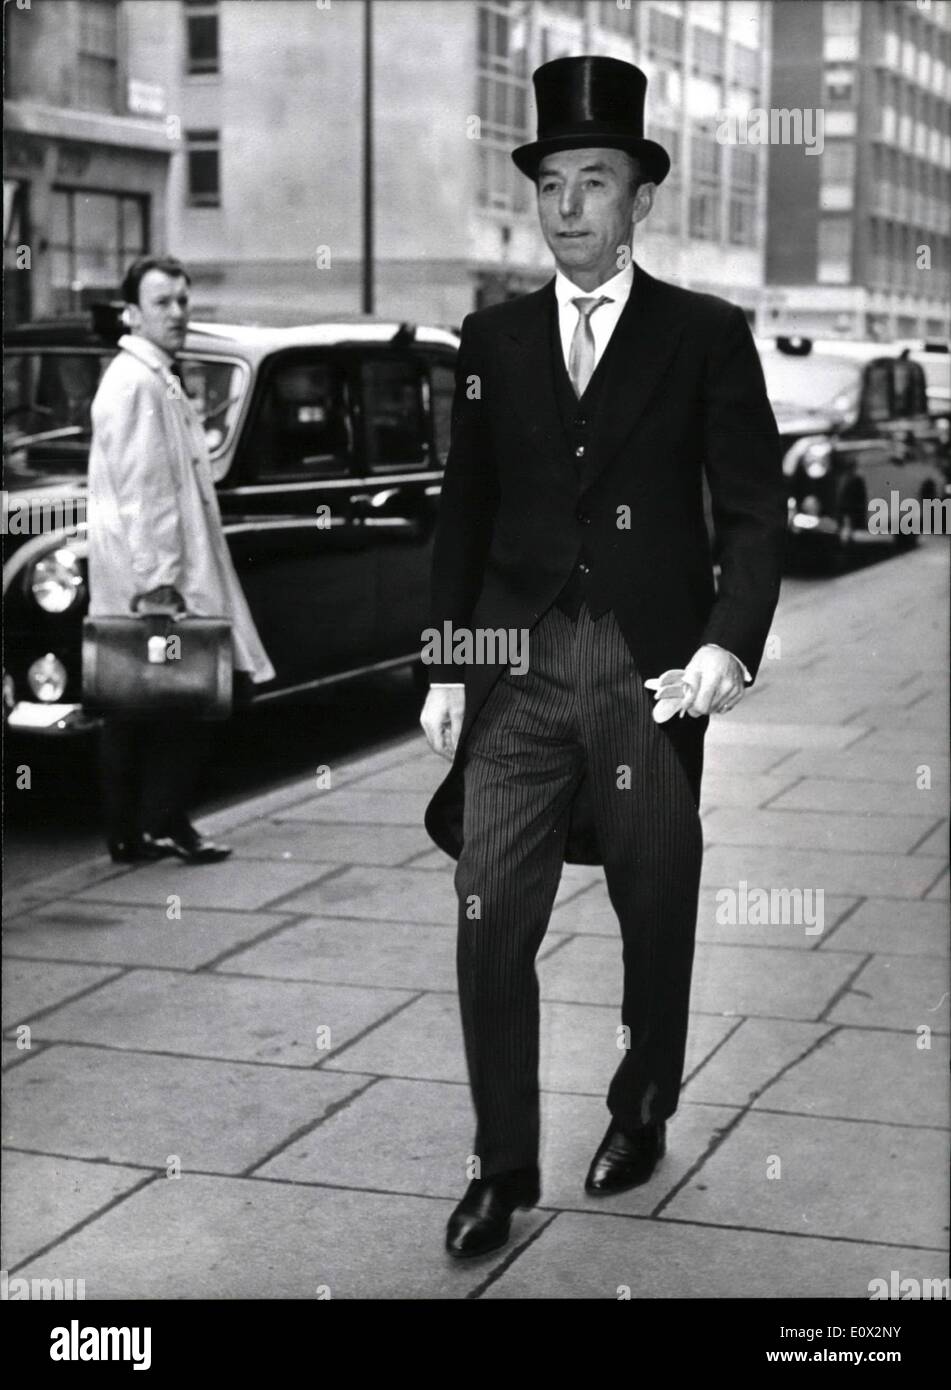 Feb. 23, 1965 - 23-2-65 Stanley Matthews honoured at Buckingham Palace. The great man of soccer in a top-hat Ã¢â‚¬â€œAmong the many persons honoured at Buckingham Palace this morning was Stanley Matthews who received a Knighthood from H.M. The Queen for his services to soccer. Photo Shows: Complete with morning suit and top-hat, Stanley Matthews on way to the Palace for his Knighthood today. Stock Photo